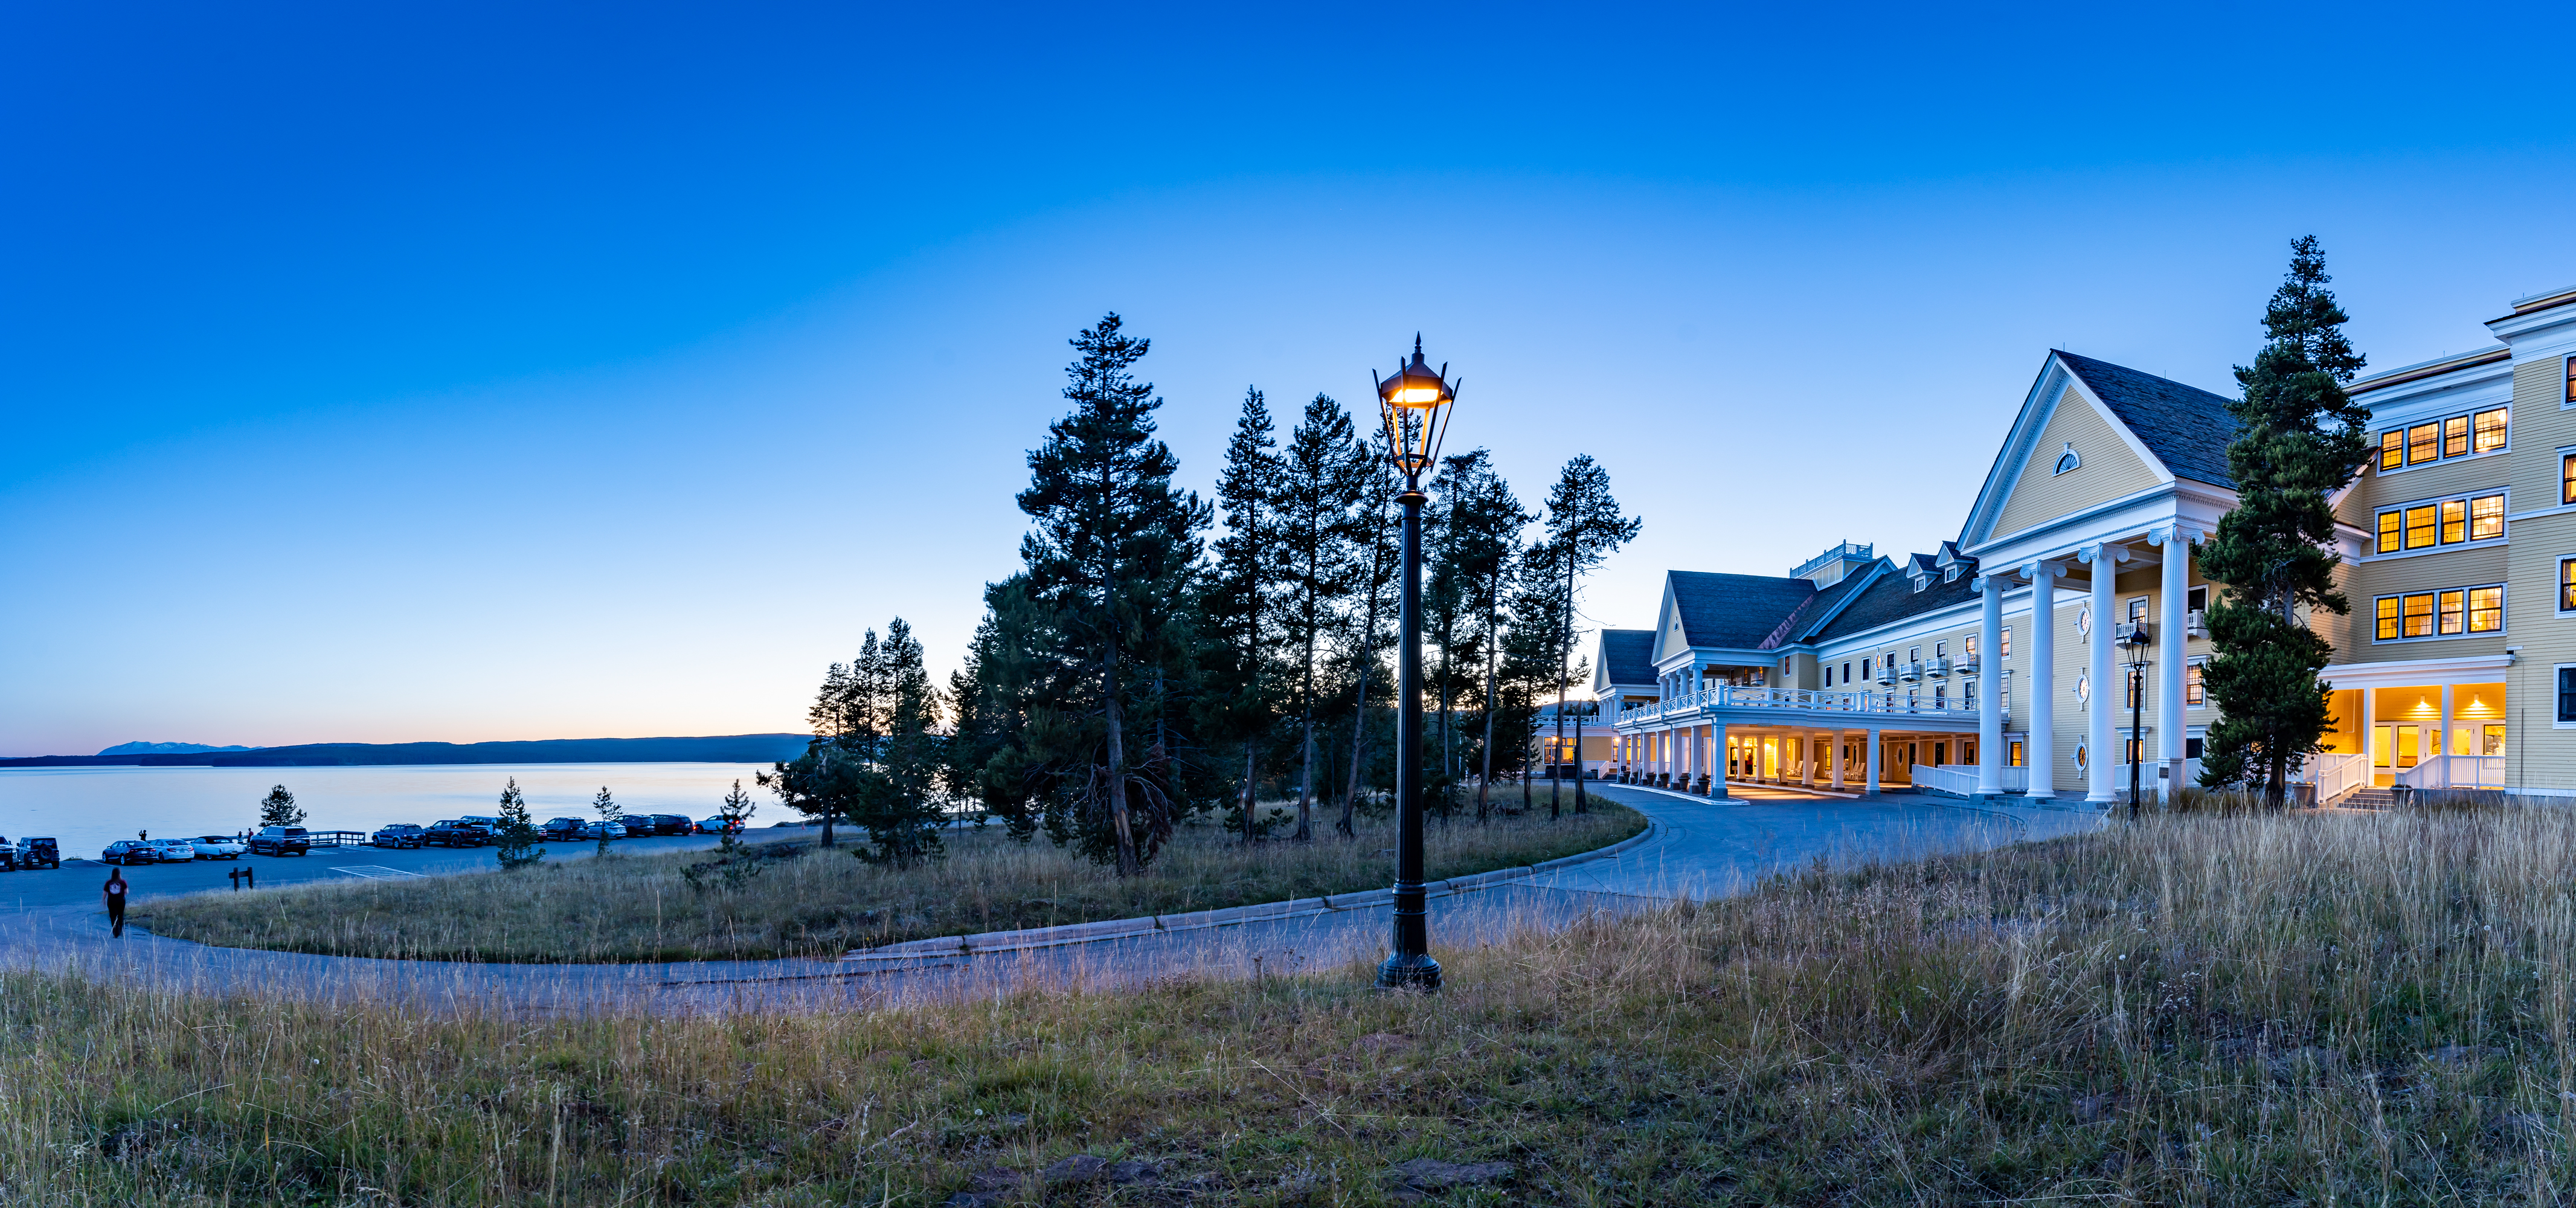 Lake Yellowstone Hotel in the evening